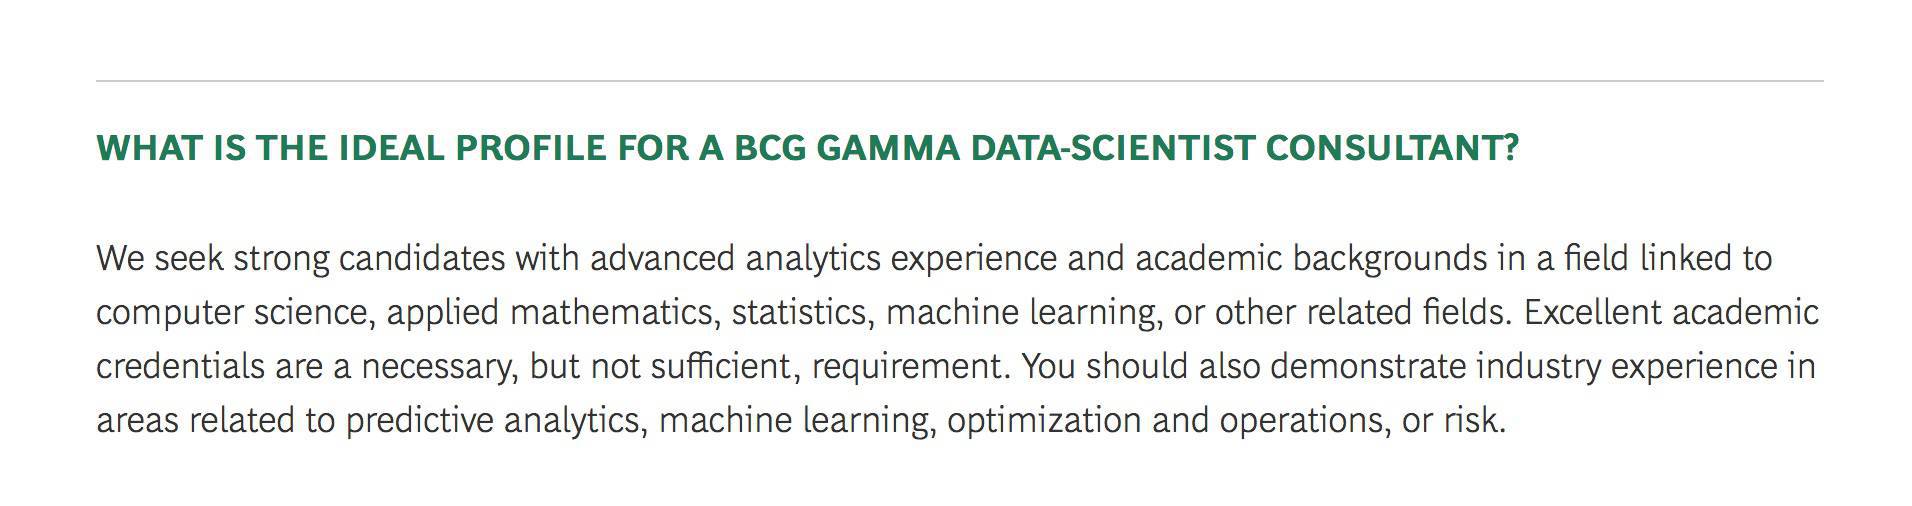 What is the ideal profile for a BCG Gamma data scientist consultant